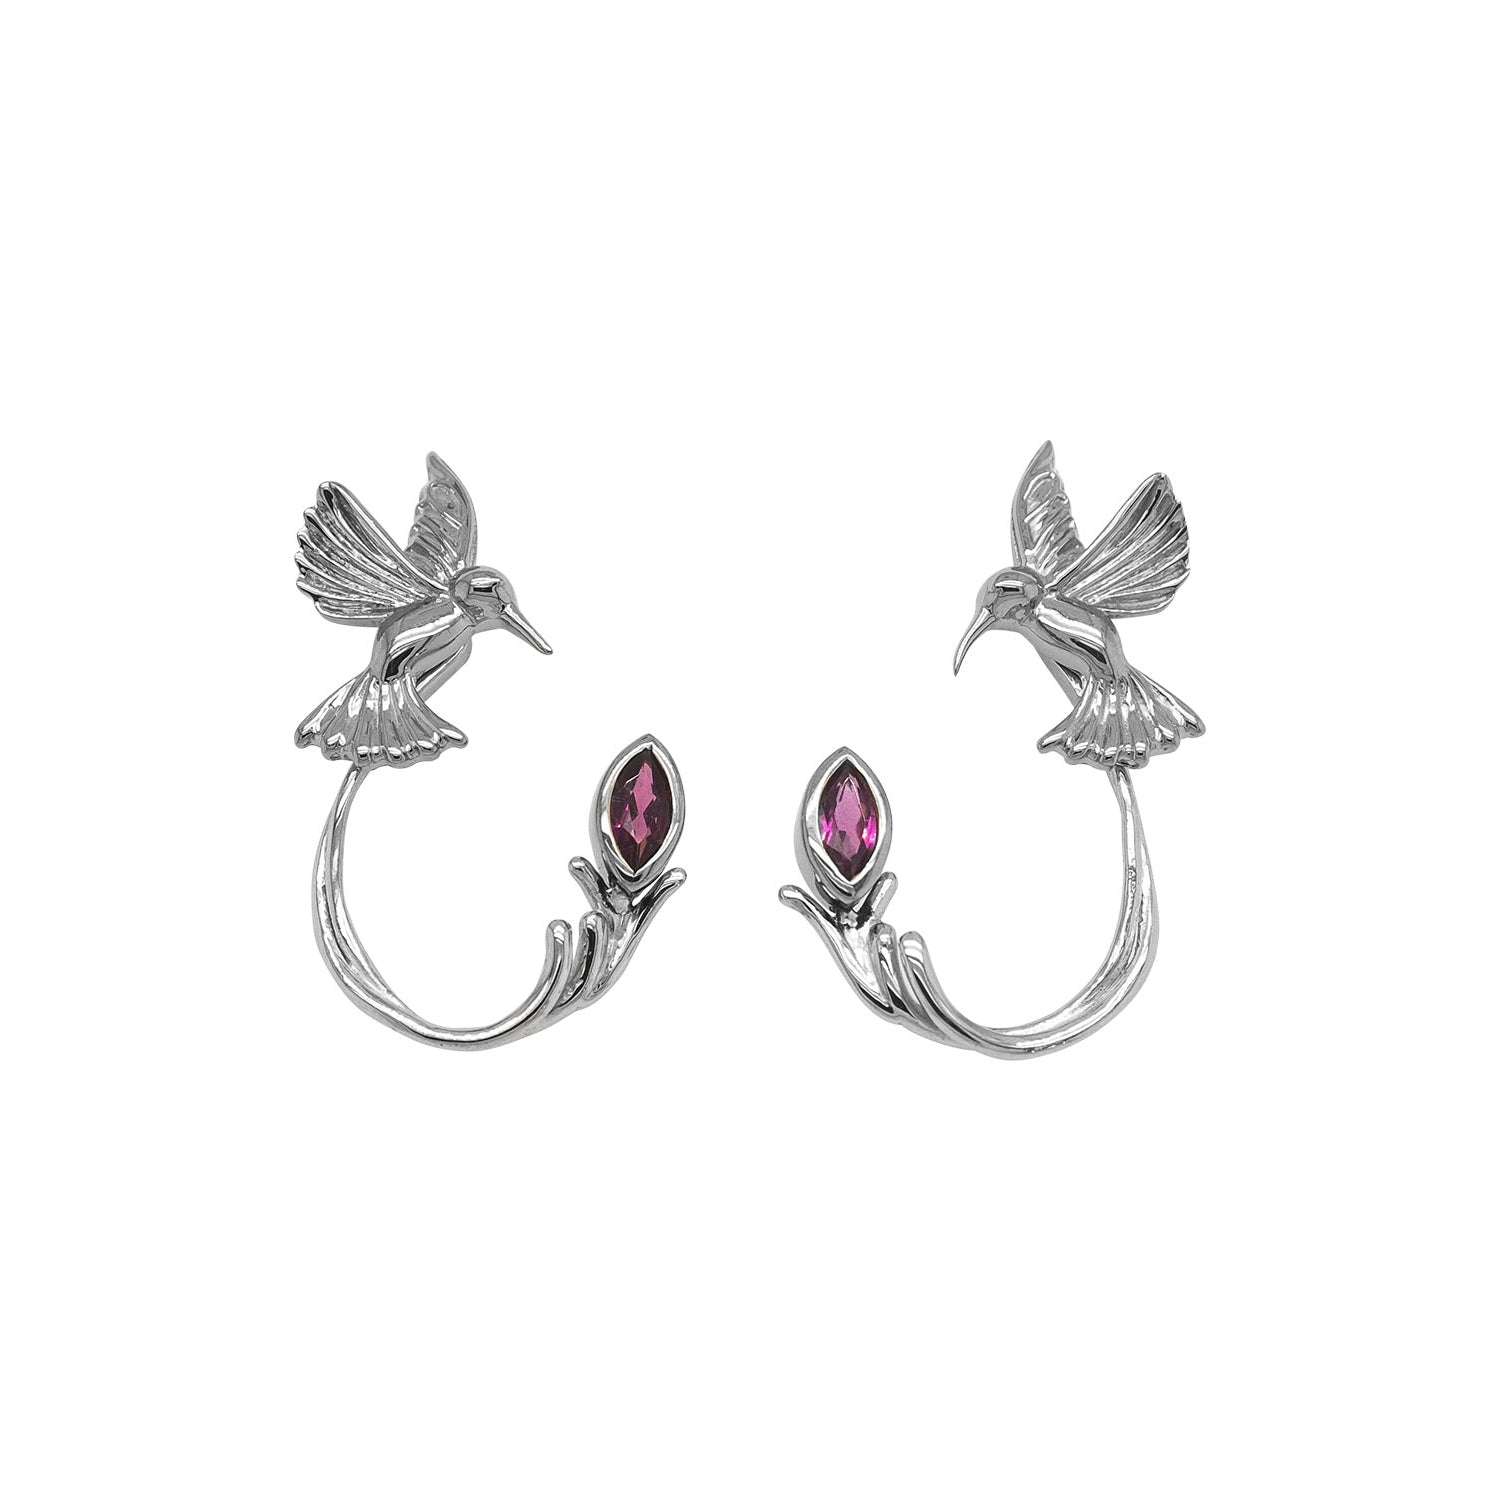 Earrings Hummingbird Stud Rhodolite Earring Jacket (3 piece) from welch and company jewelers near syracuse ny 